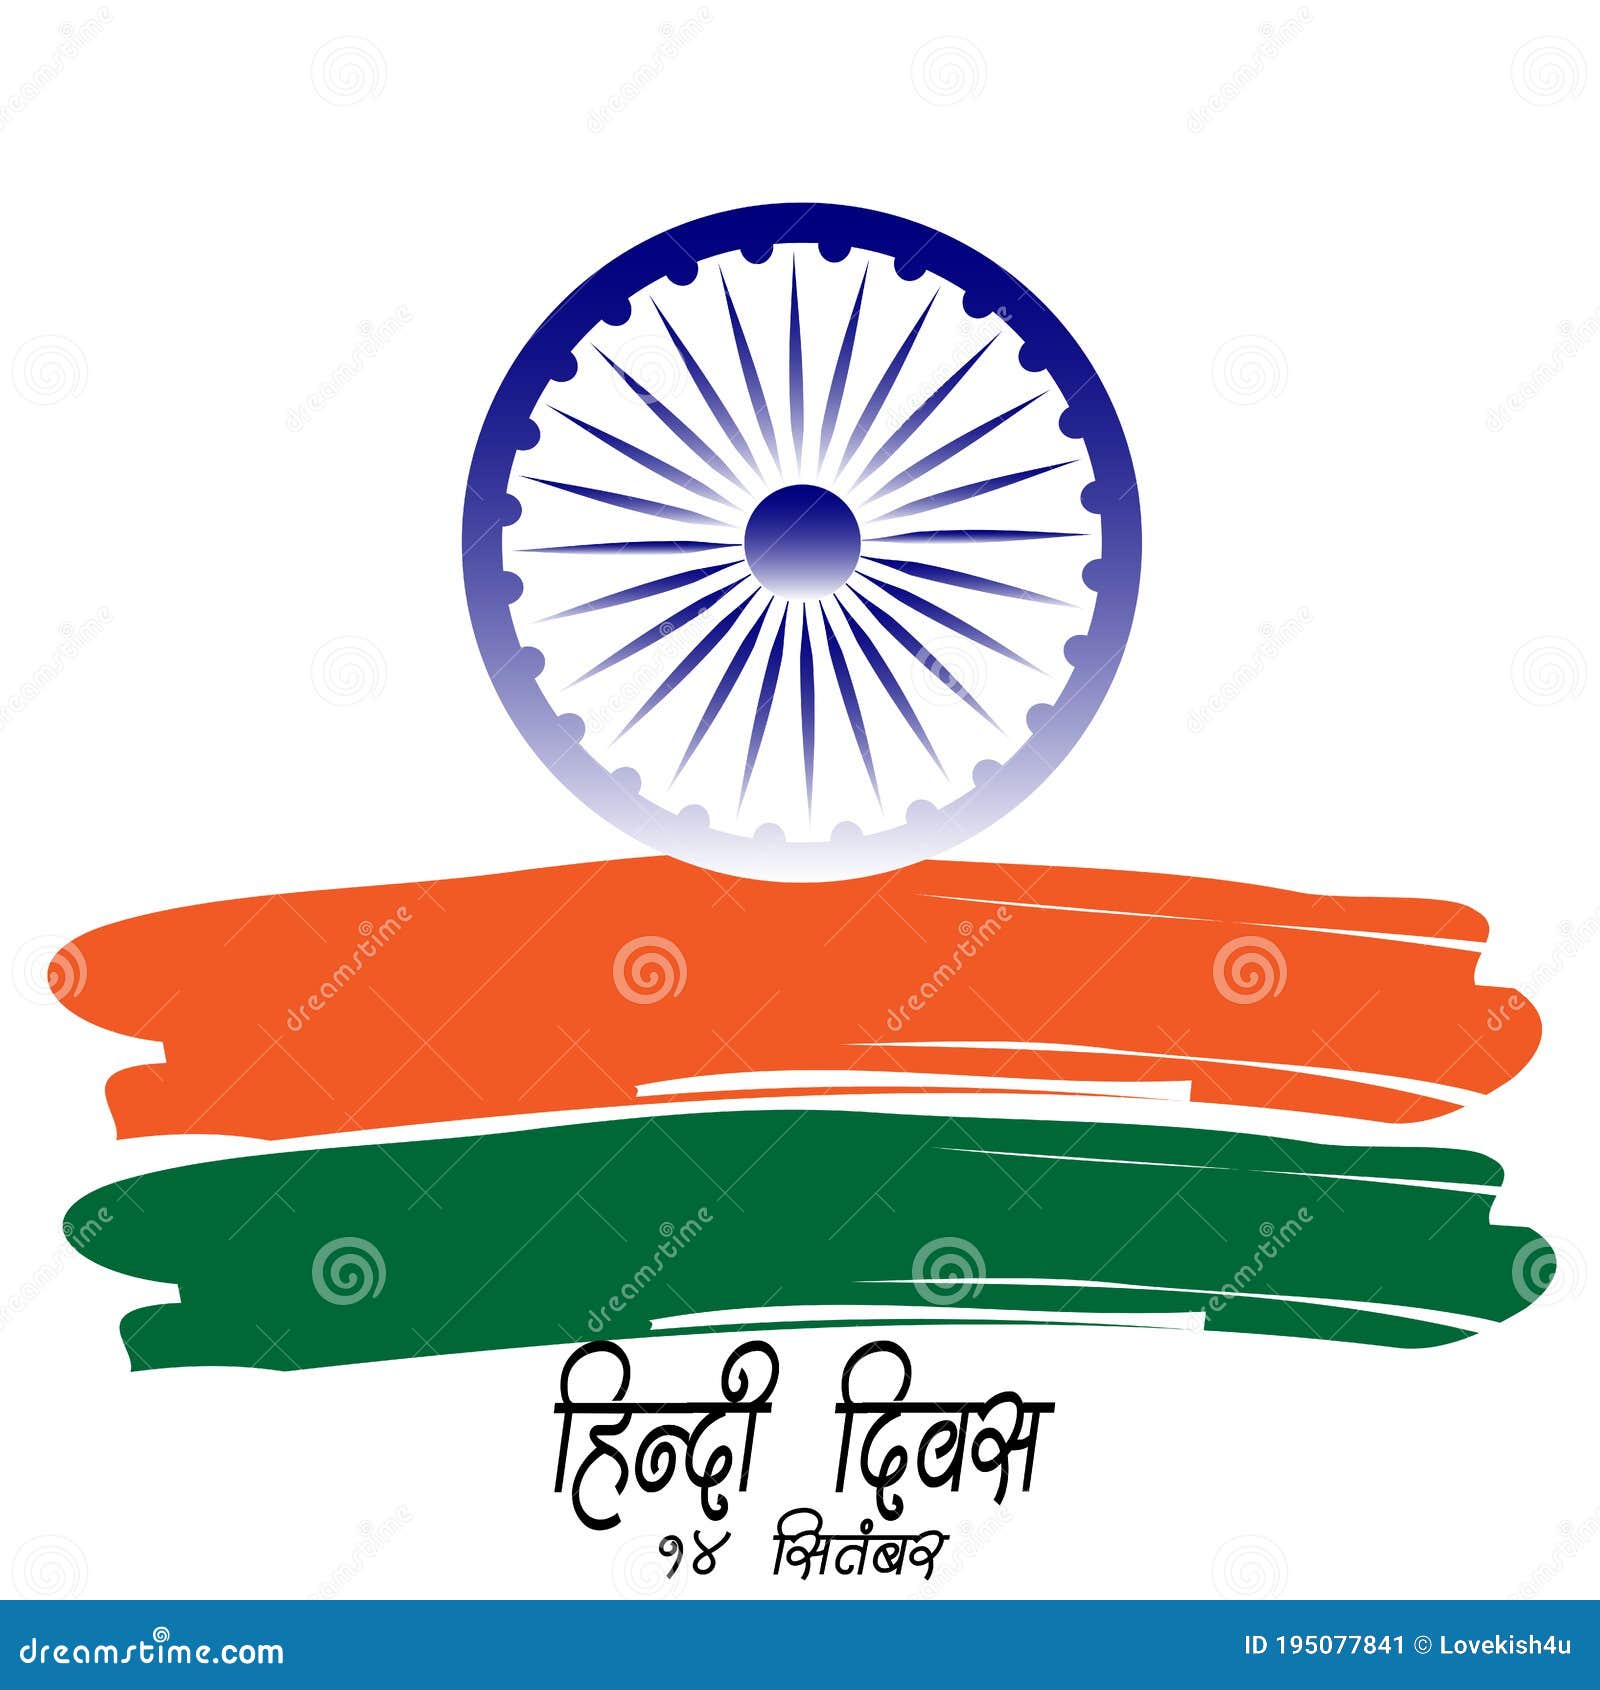 Hindi Diwas 14 September Written in Hindi Which Means Hindi Day 14  September in English Stock Vector - Illustration of grunge, mother:  195077841